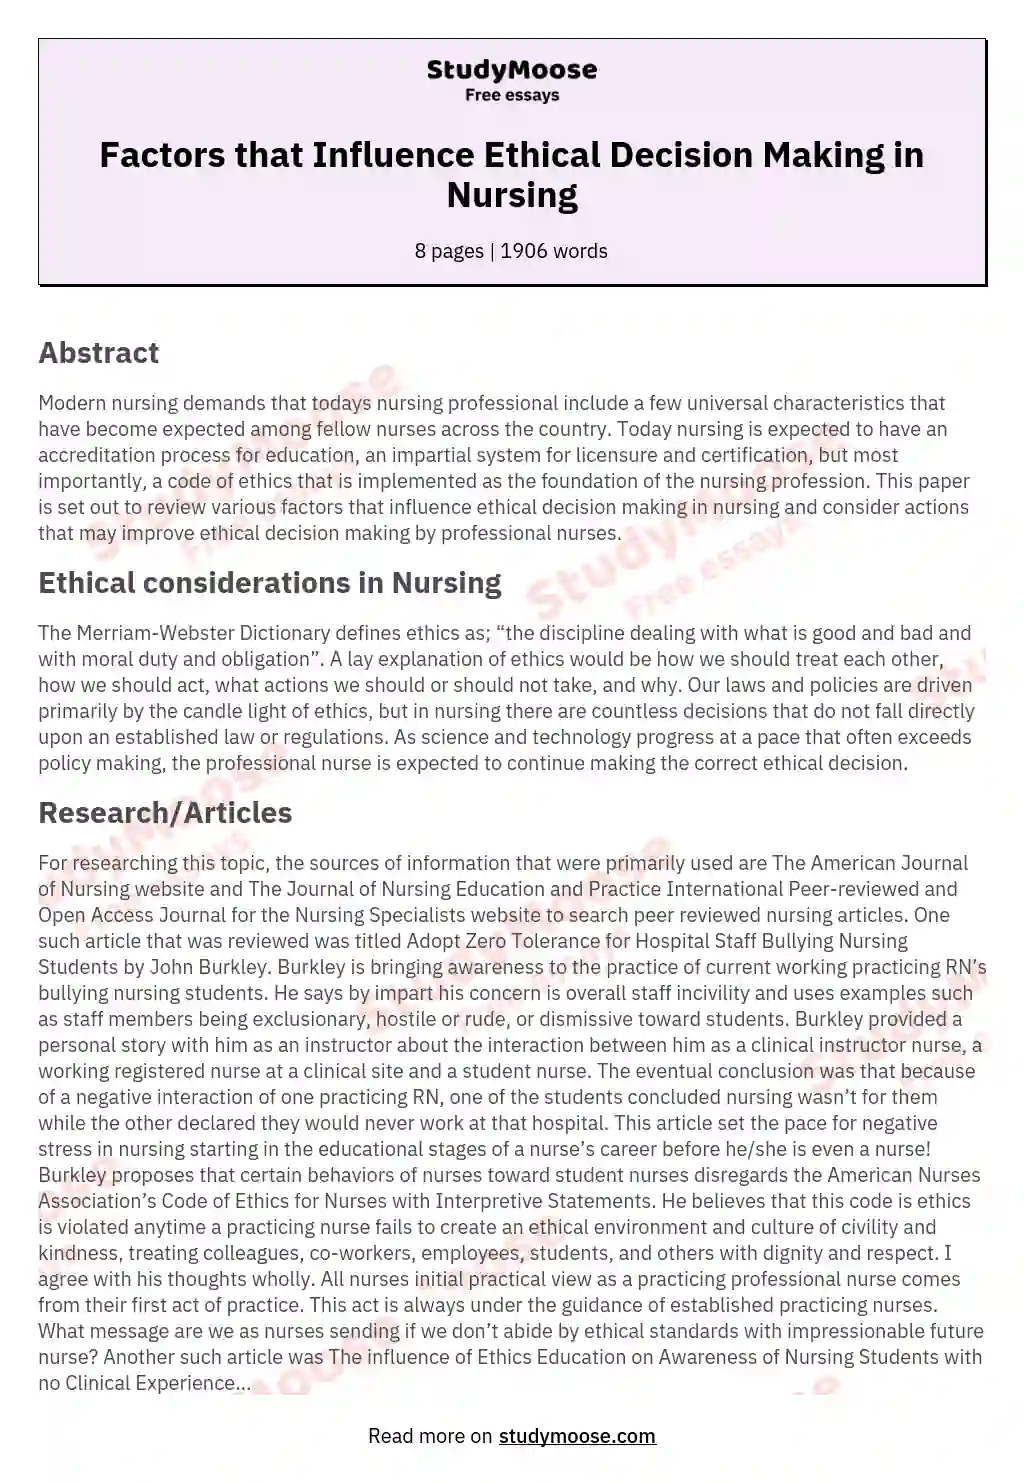 Factors that Influence Ethical Decision Making in Nursing essay